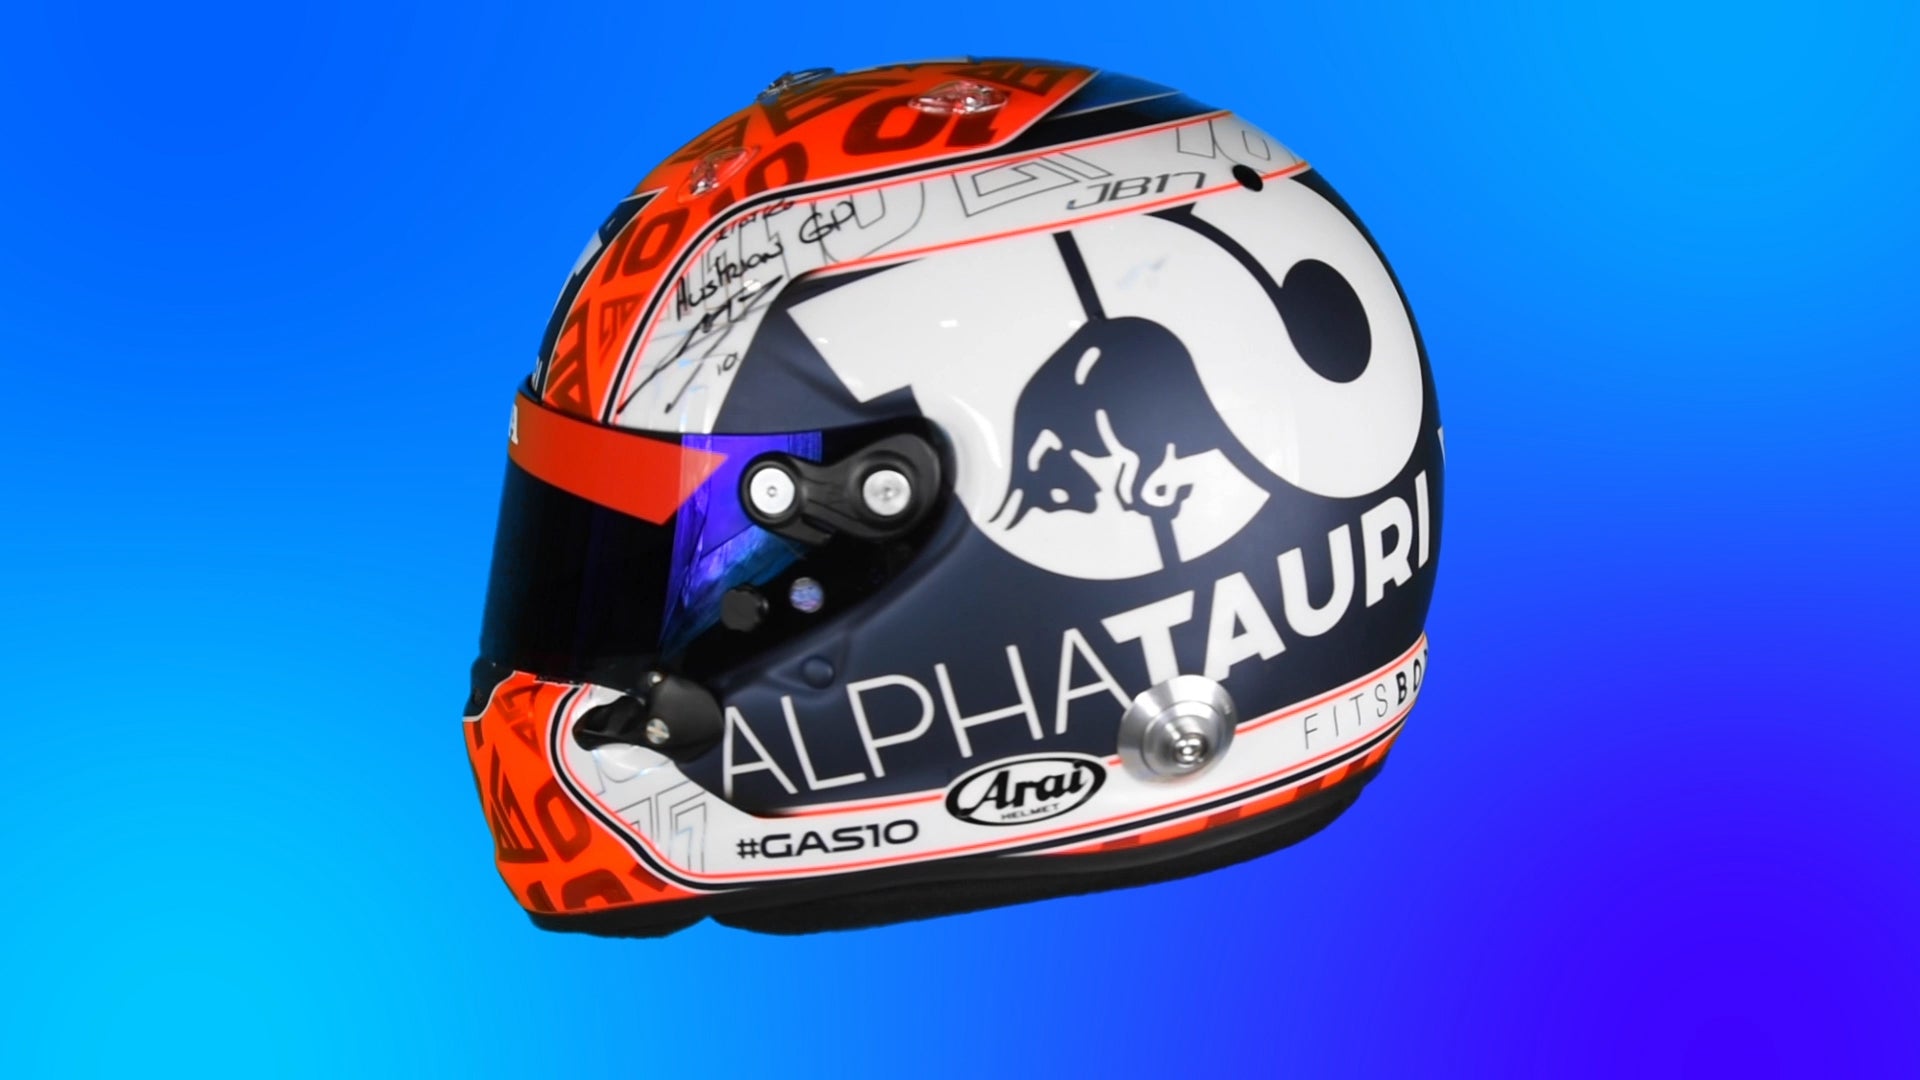 Signed, race-used items from Gasly, F1’s newest superstar